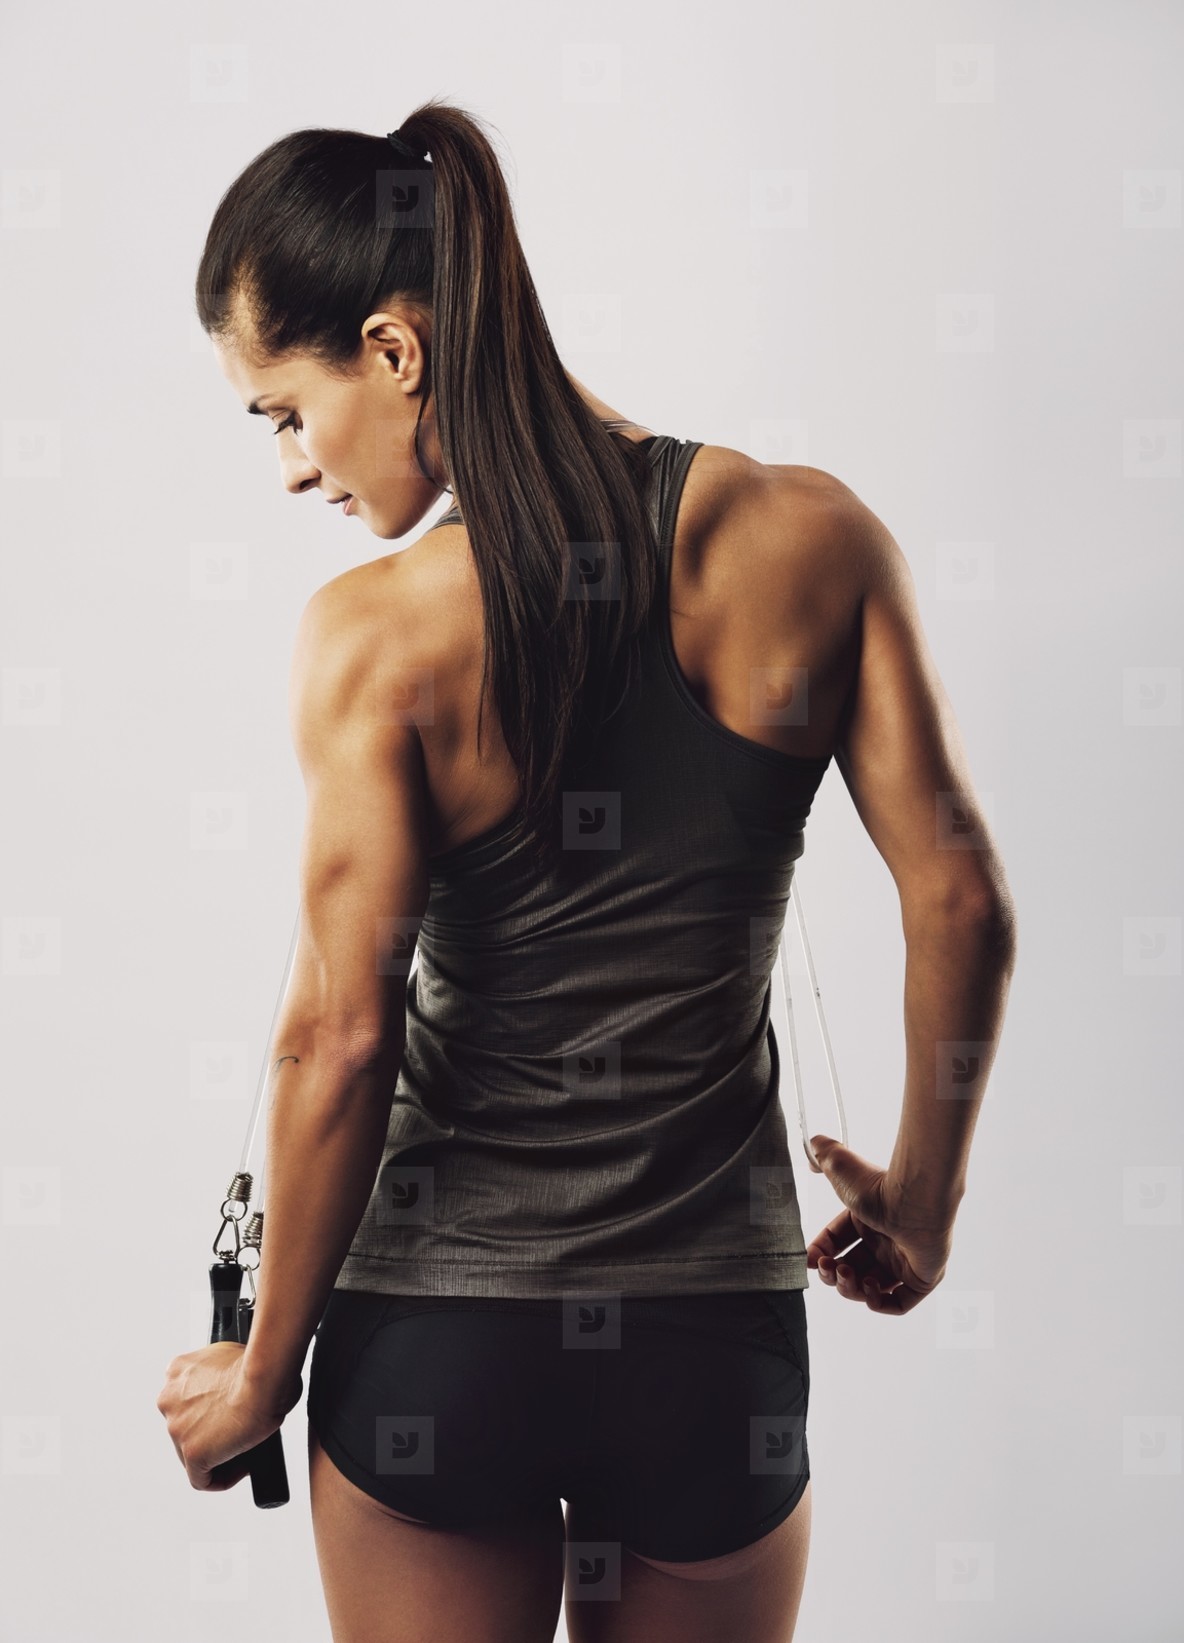 Female athlete with jumping rope posing on grey background